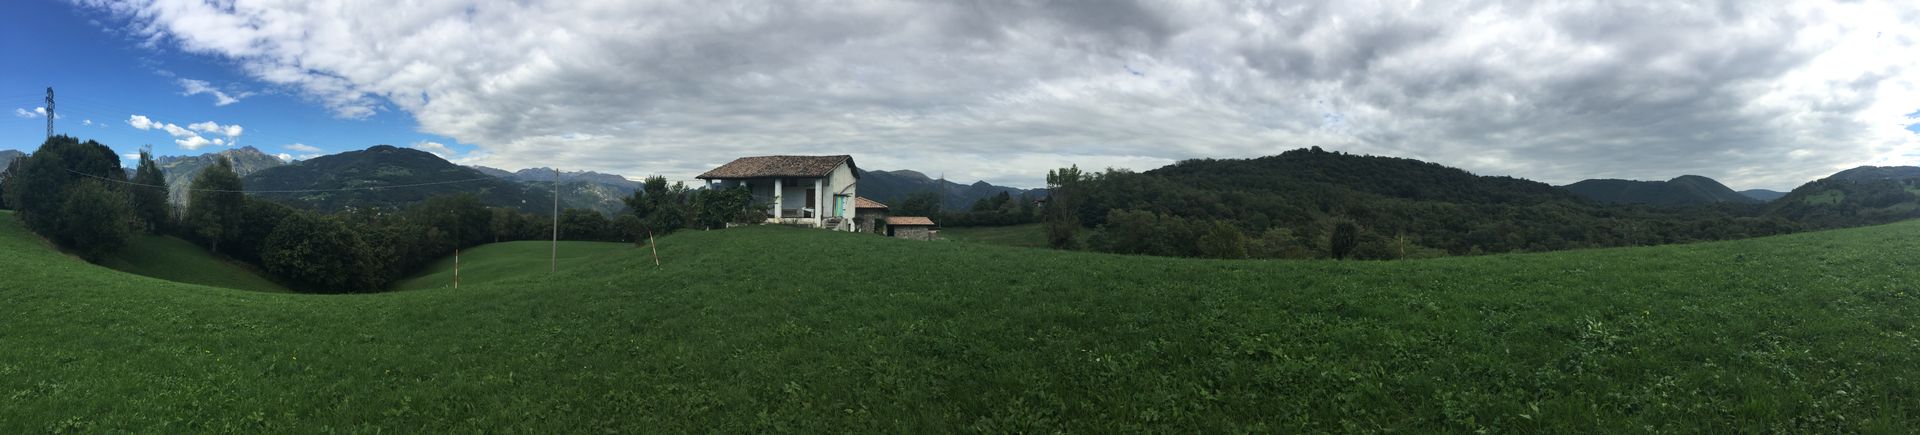 Farmhouse renovation project, recovery old house in the countryside of Bergamo. Officina Magisafi architecture design - panoramic photo